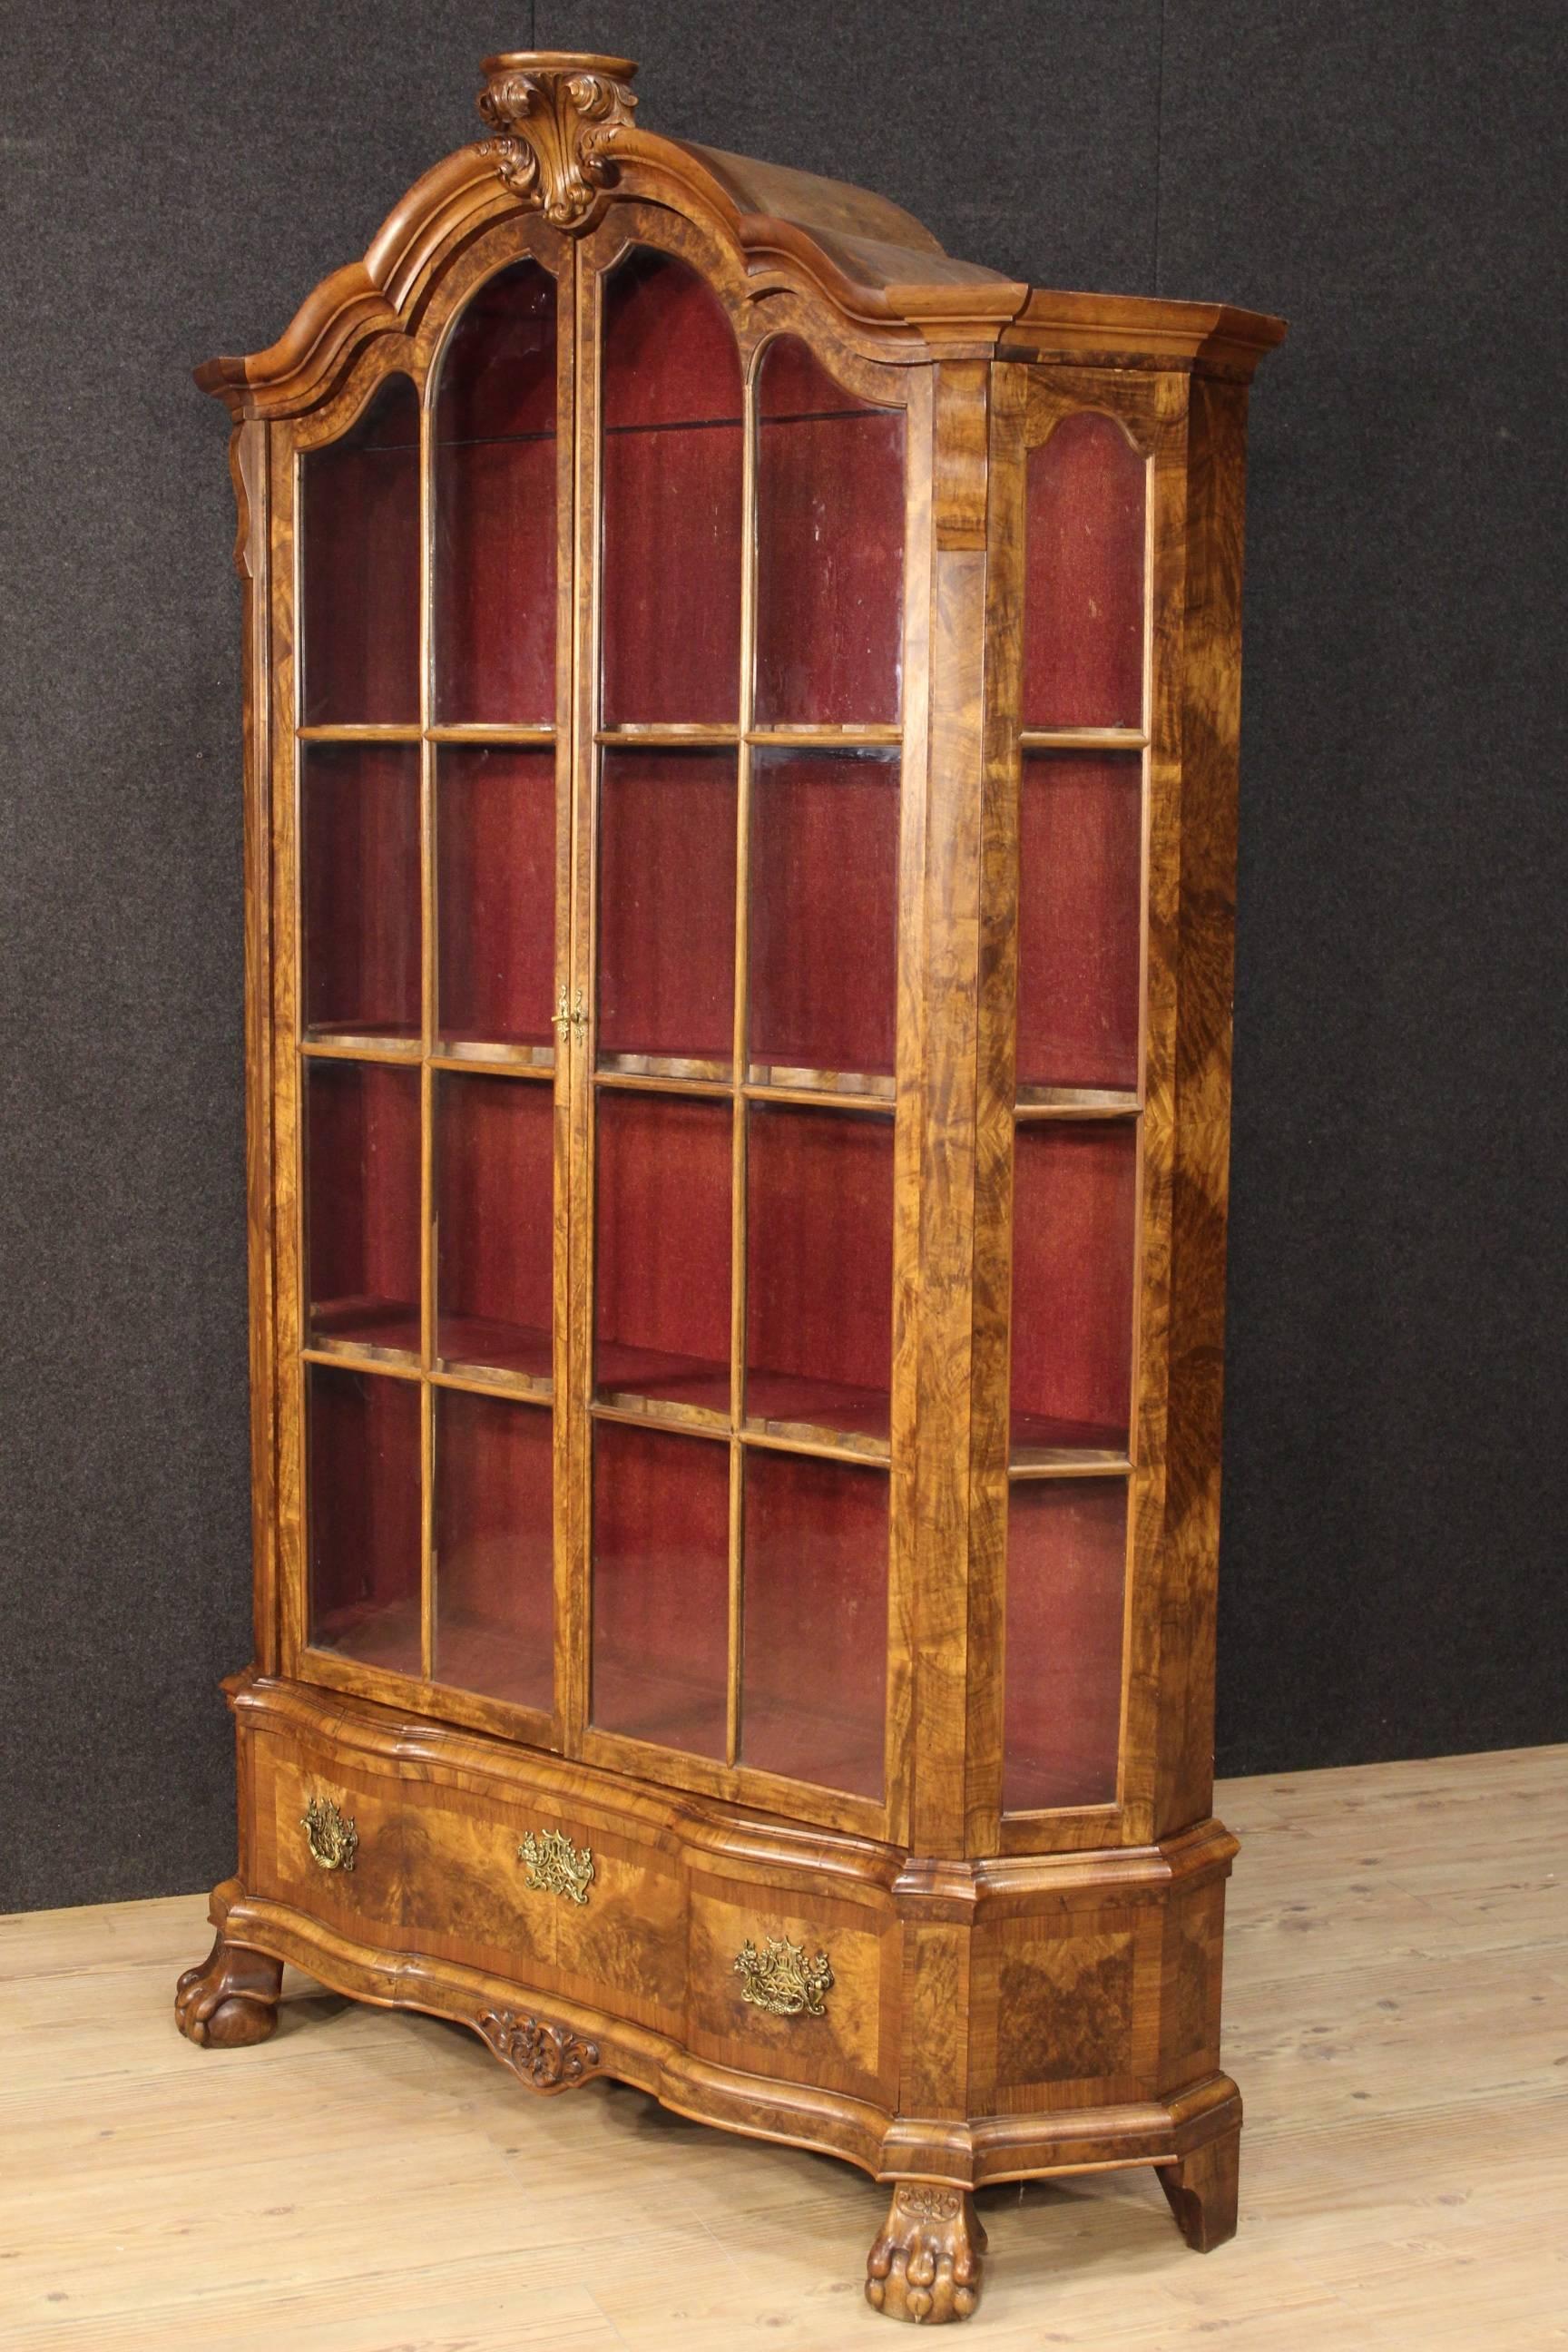 Big Dutch showcase of the 20th century. Furniture carved and veneered in walnut, burl and mahogany. Bookcase with two large doors, complete with a working key, plus a lower drawer, missing key. Furniture supported by four feet of which two frontal